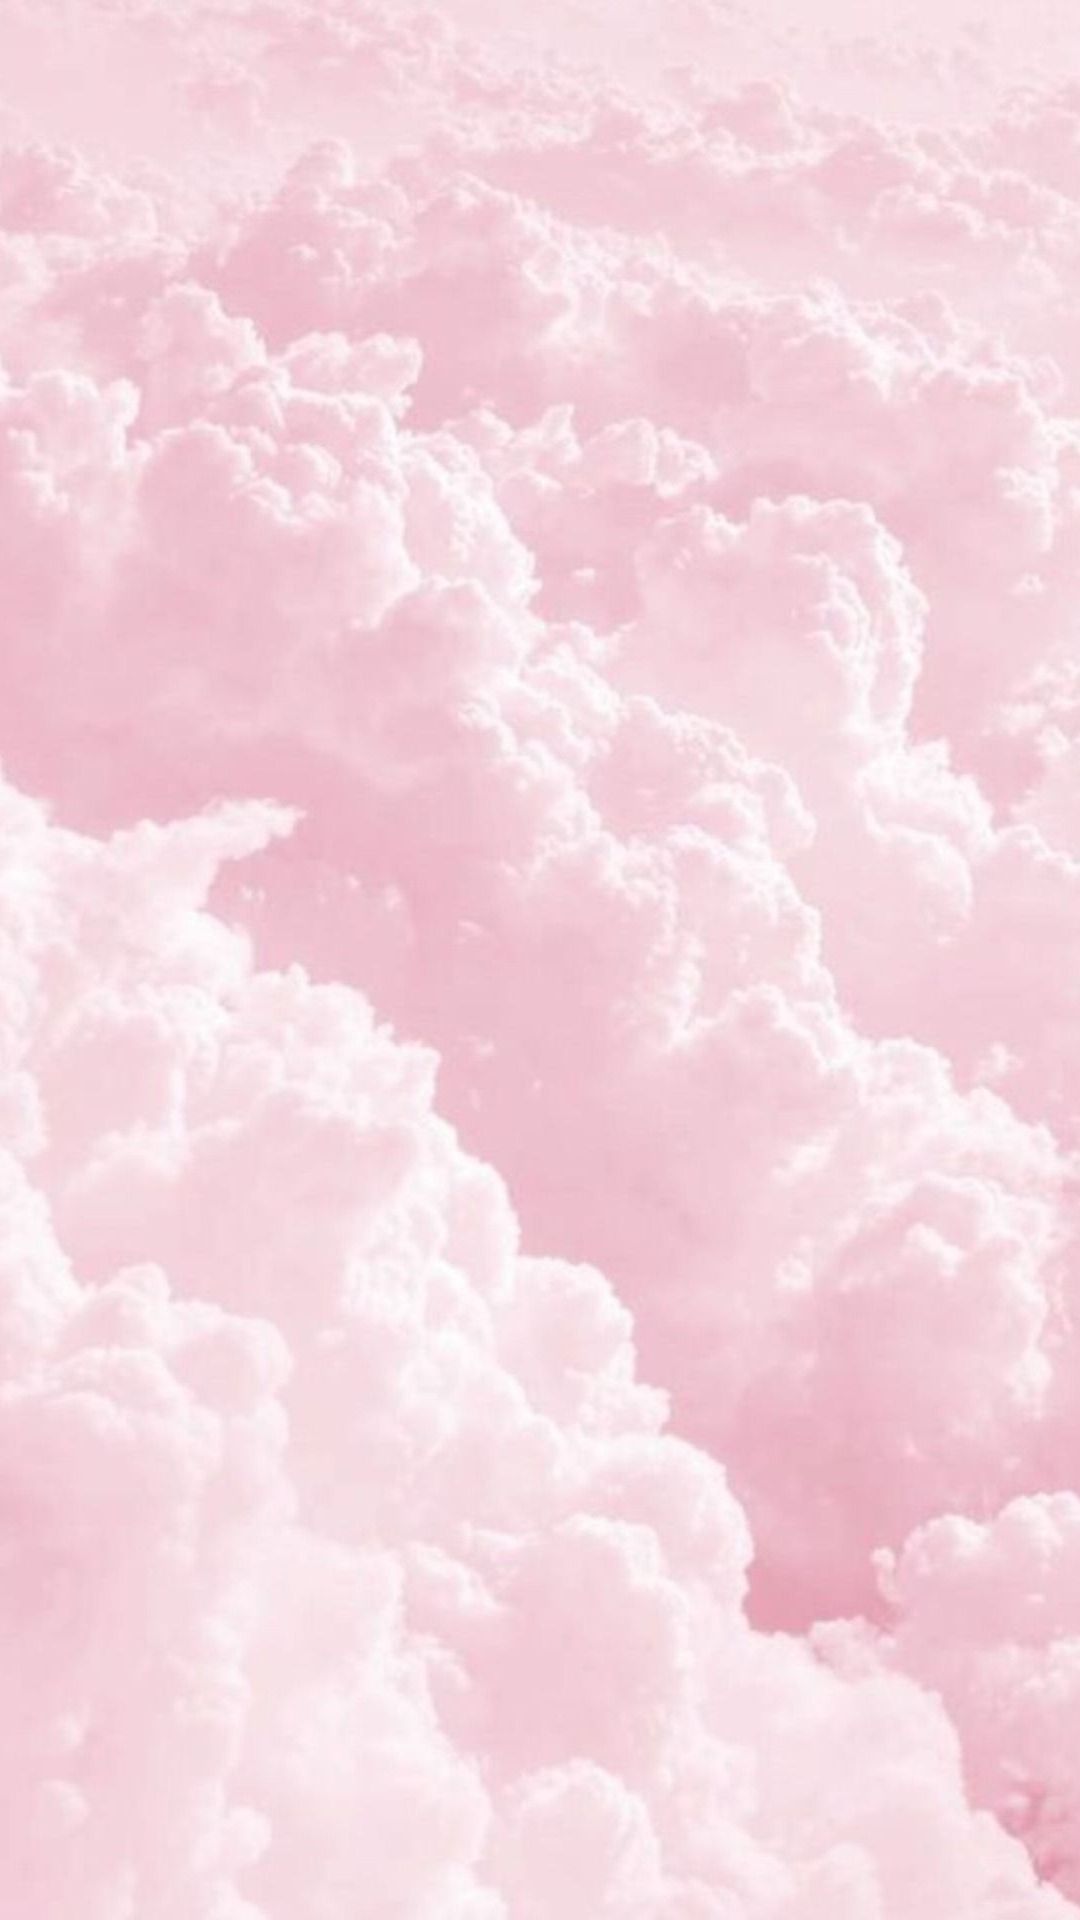 Aesthetic Pink And White HD Wallpaper .com